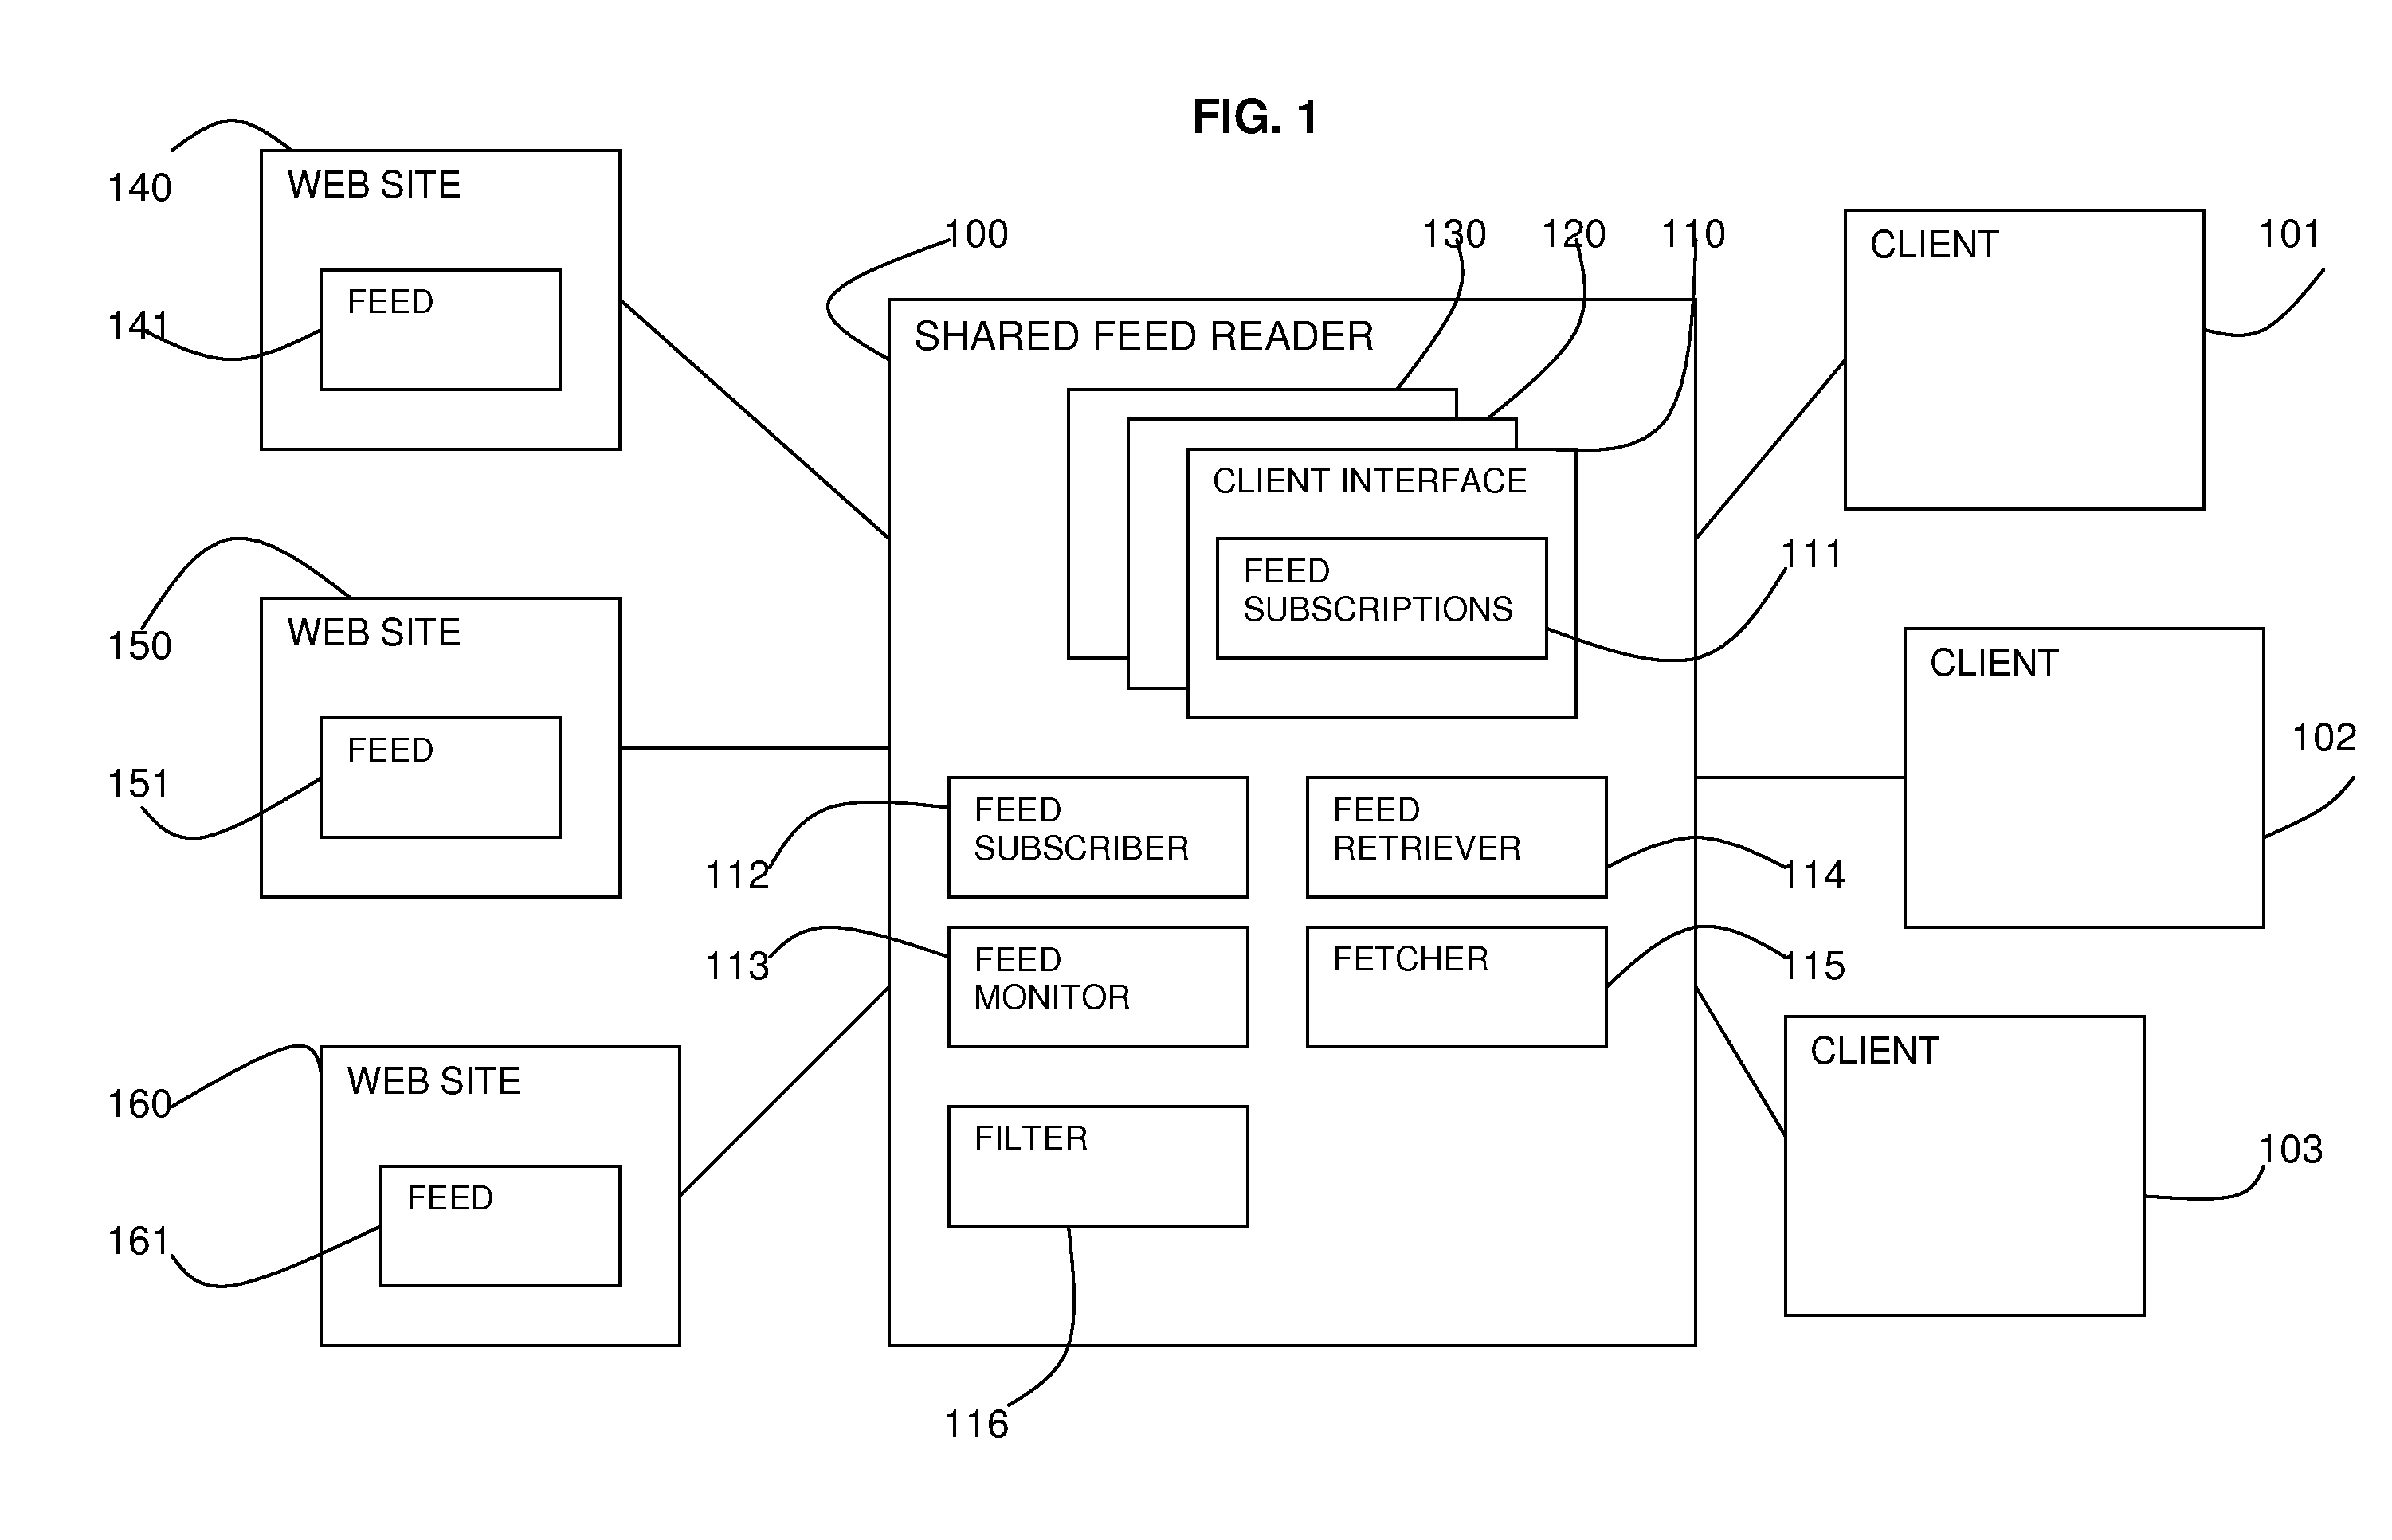 Shared Feed Reader and Method of Shared Feed Reading